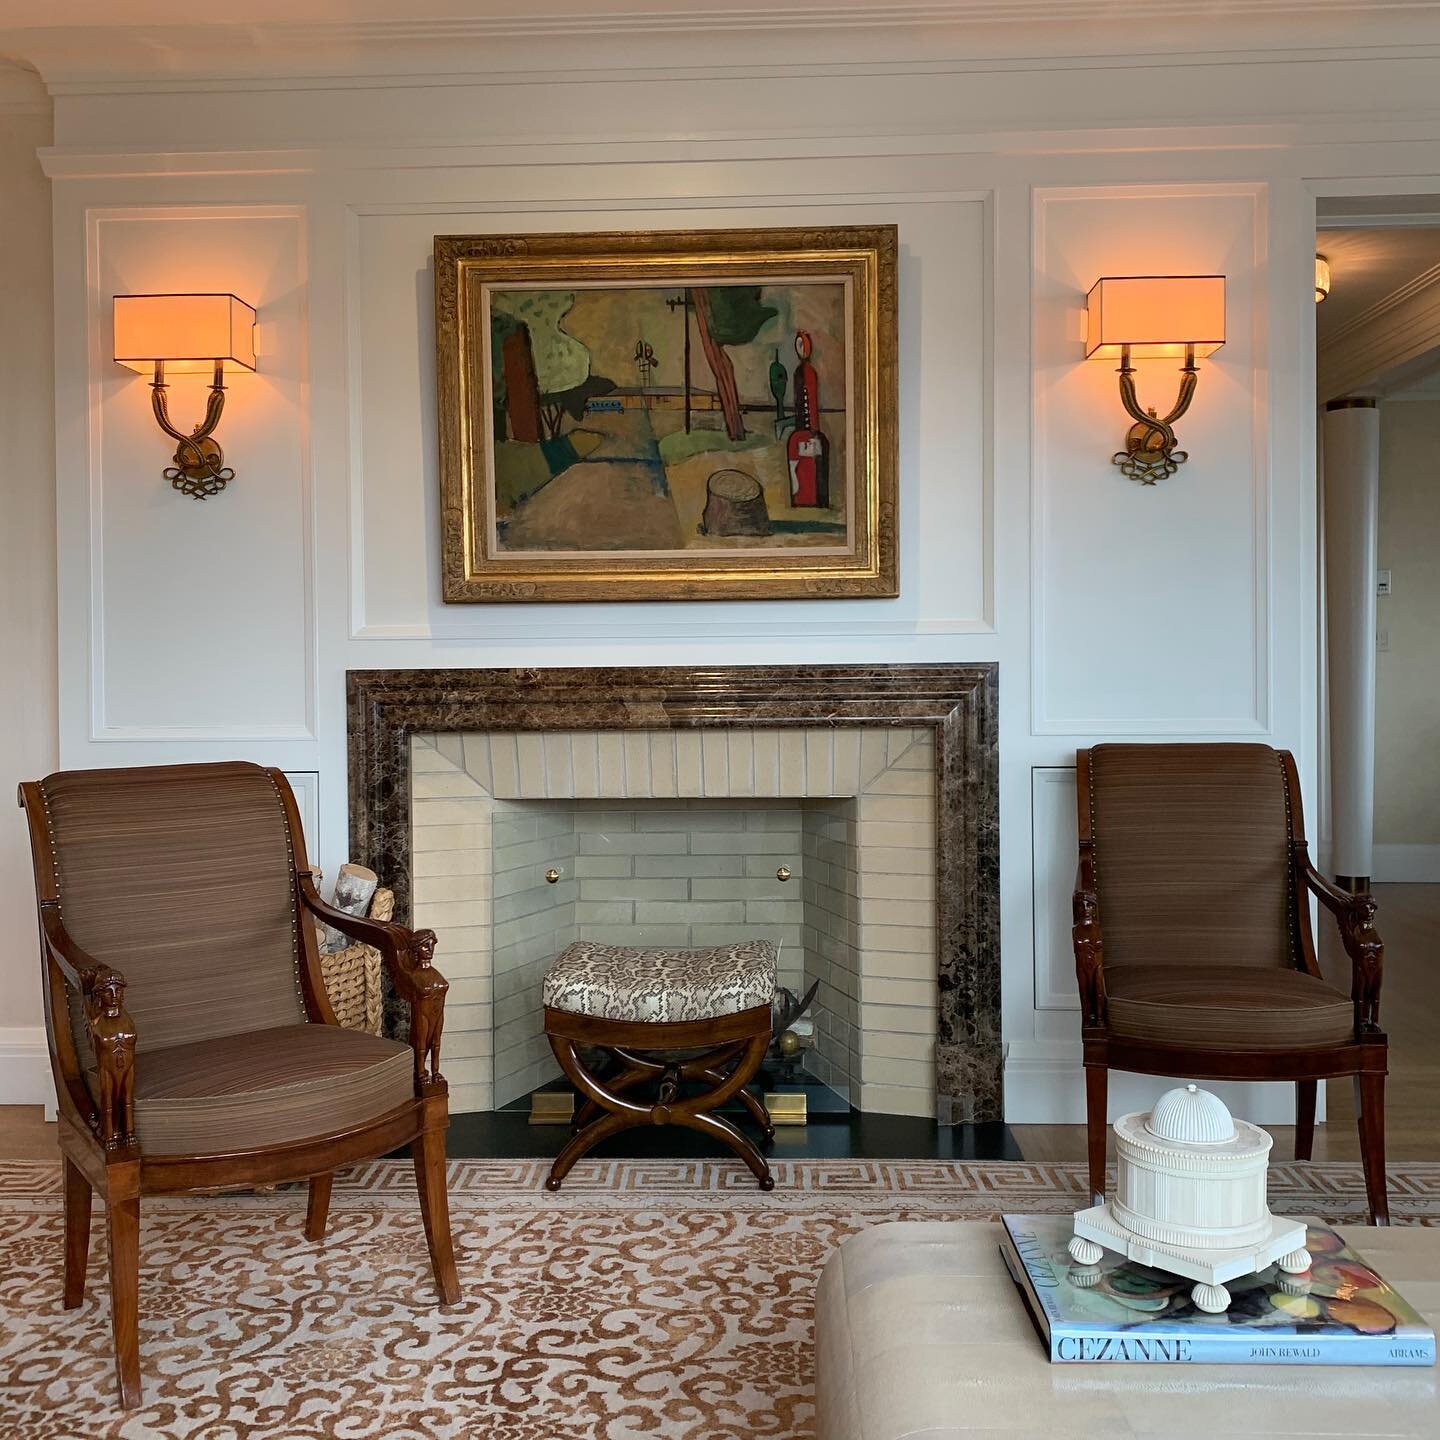 Rainy day at our Boston pied-à-terre project #jacobchairs #leleausconces #poilleratandirons #buzzkelly #buzzkellyinteriors #christianricciarchitecture